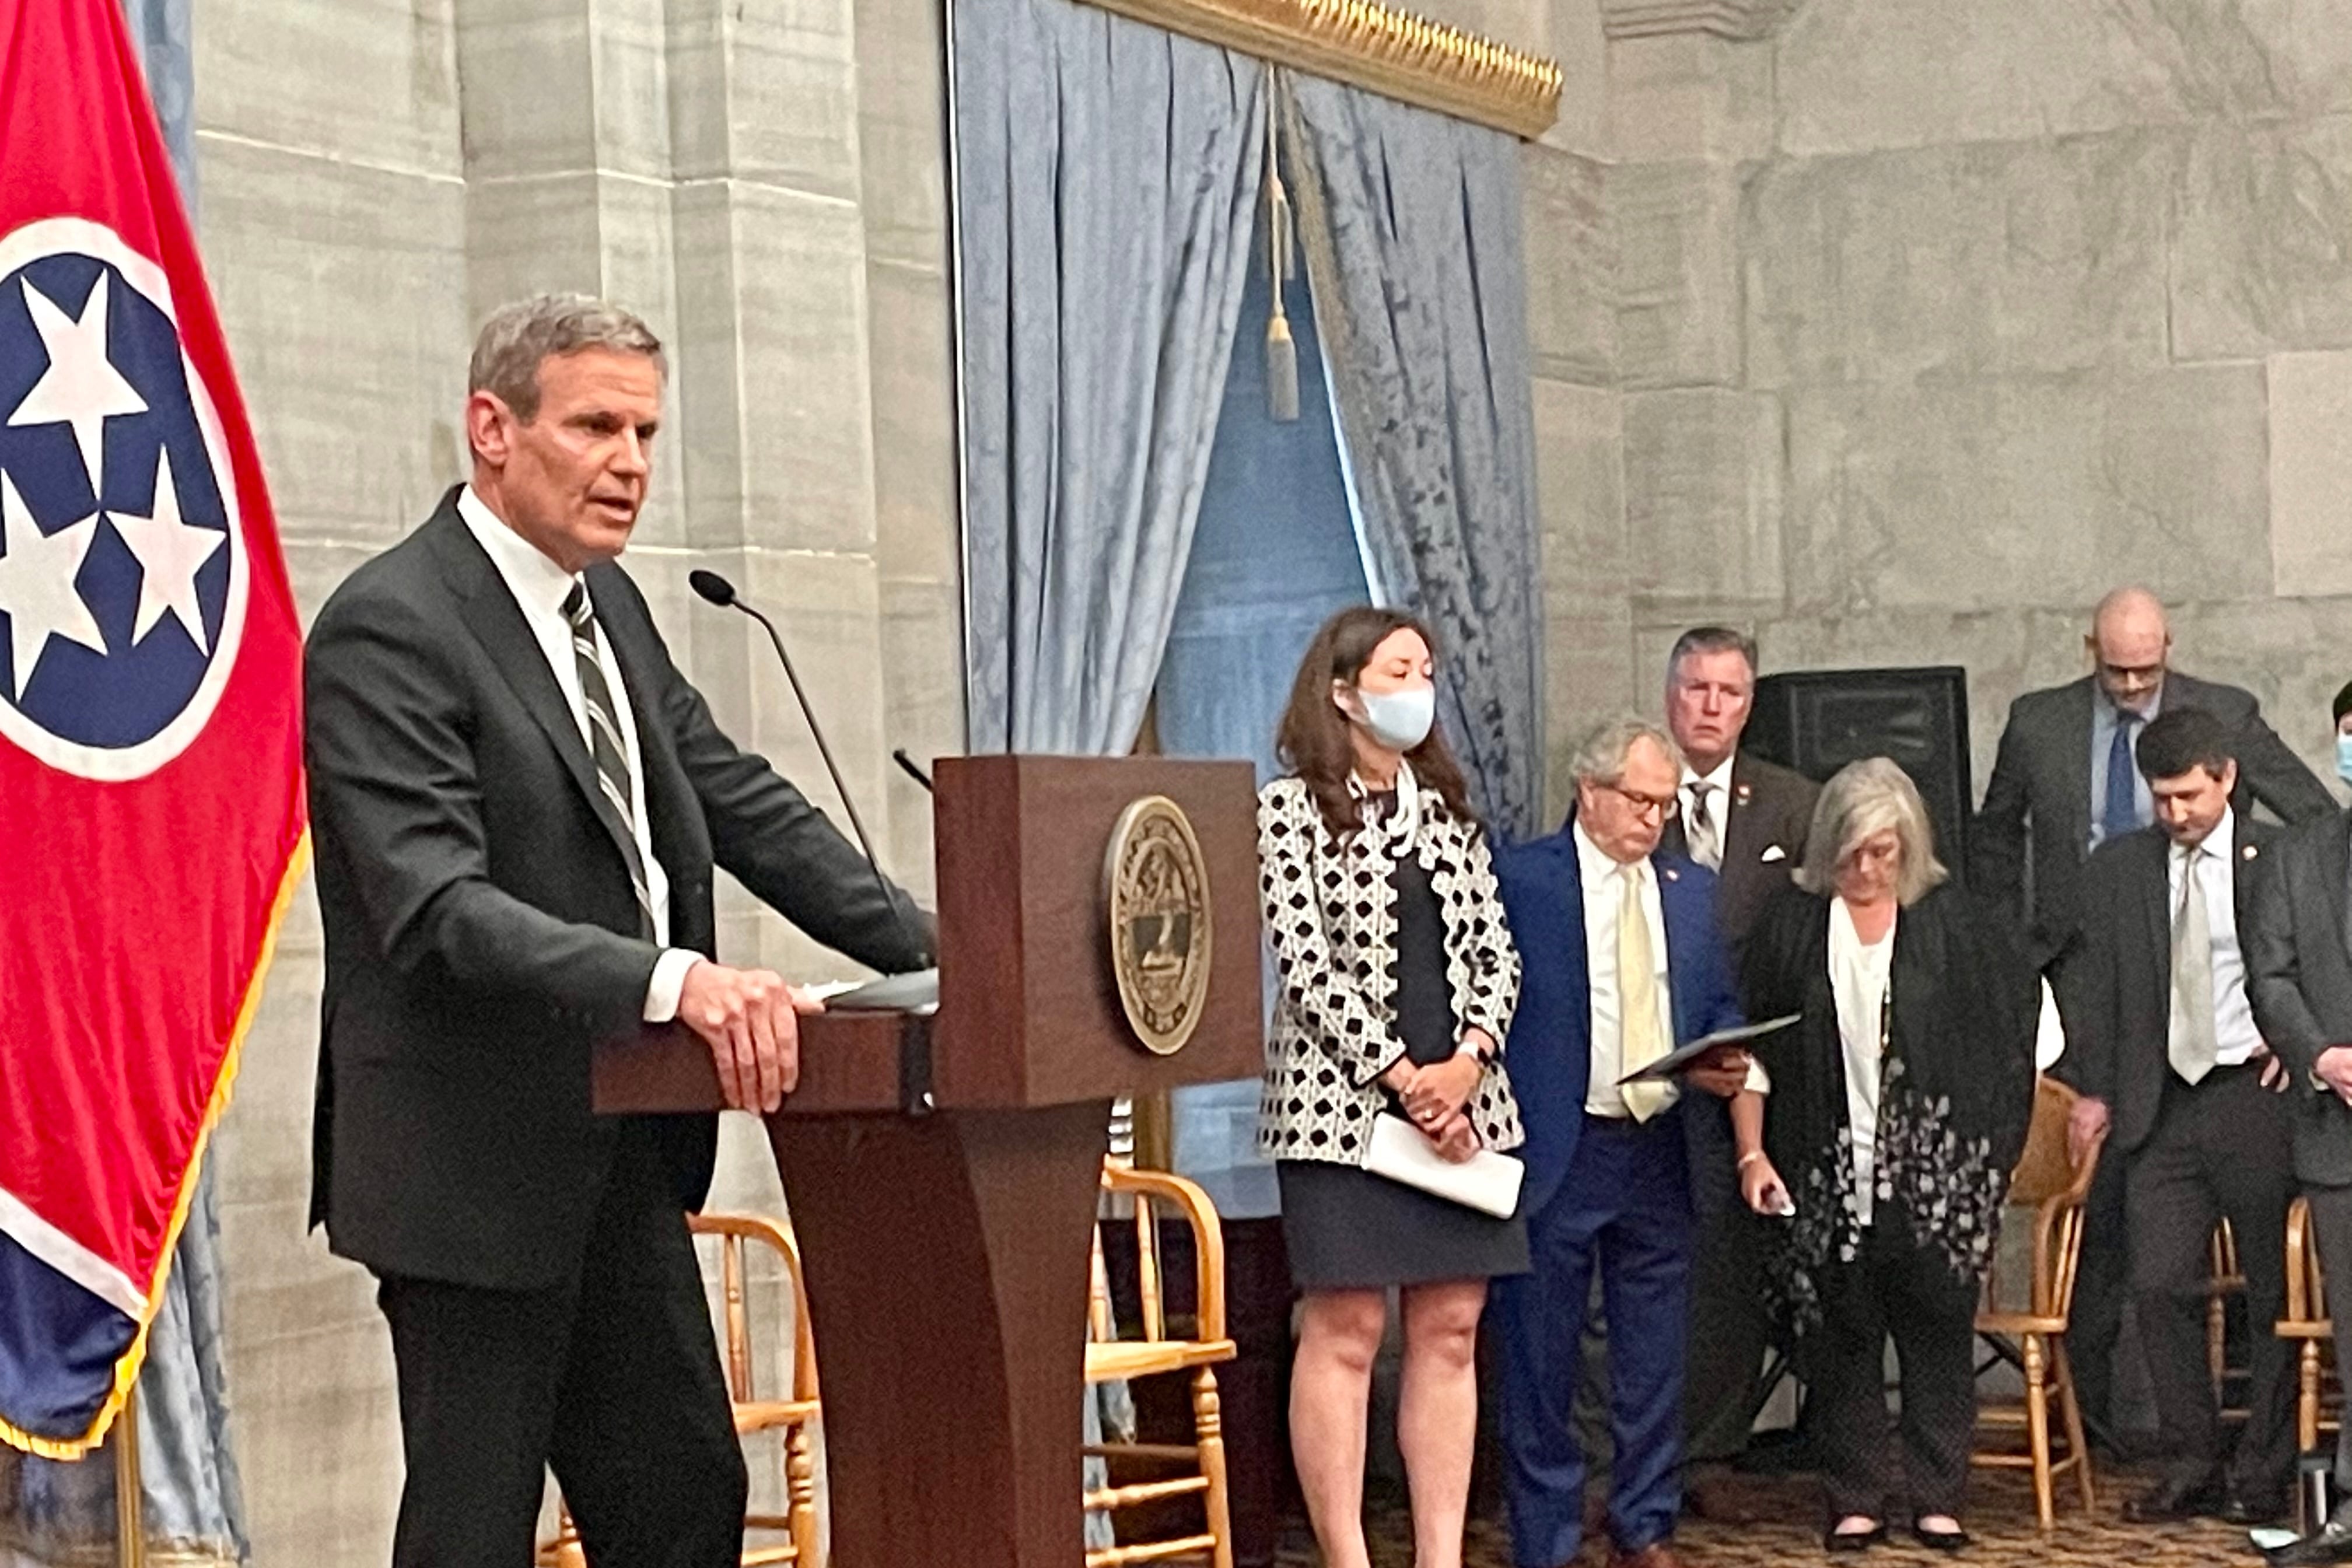 Gov. Bill Lee asks for prayers for shooting victims at Knoxville’s Austin-East Magnet High School during a press conference on Monday, April 12, 2021.